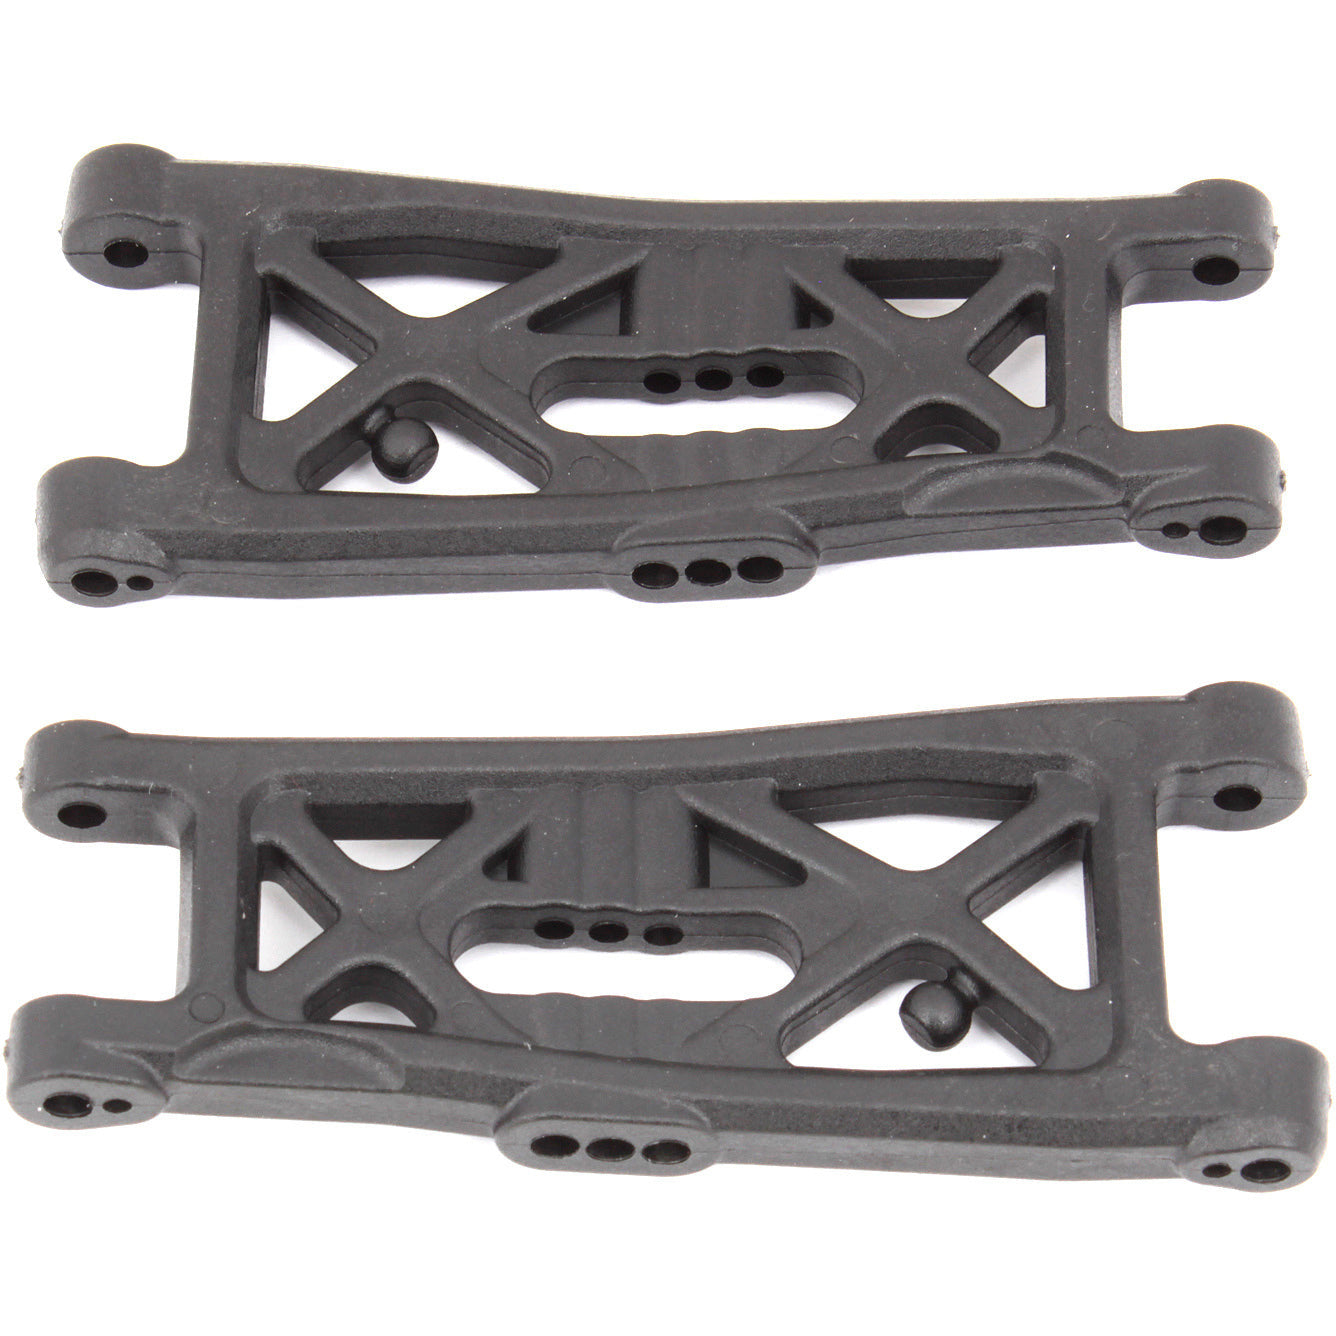 TEAM ASSOCIATED RC10B6 FT Front Suspension Arms, Gull wing, Carbon